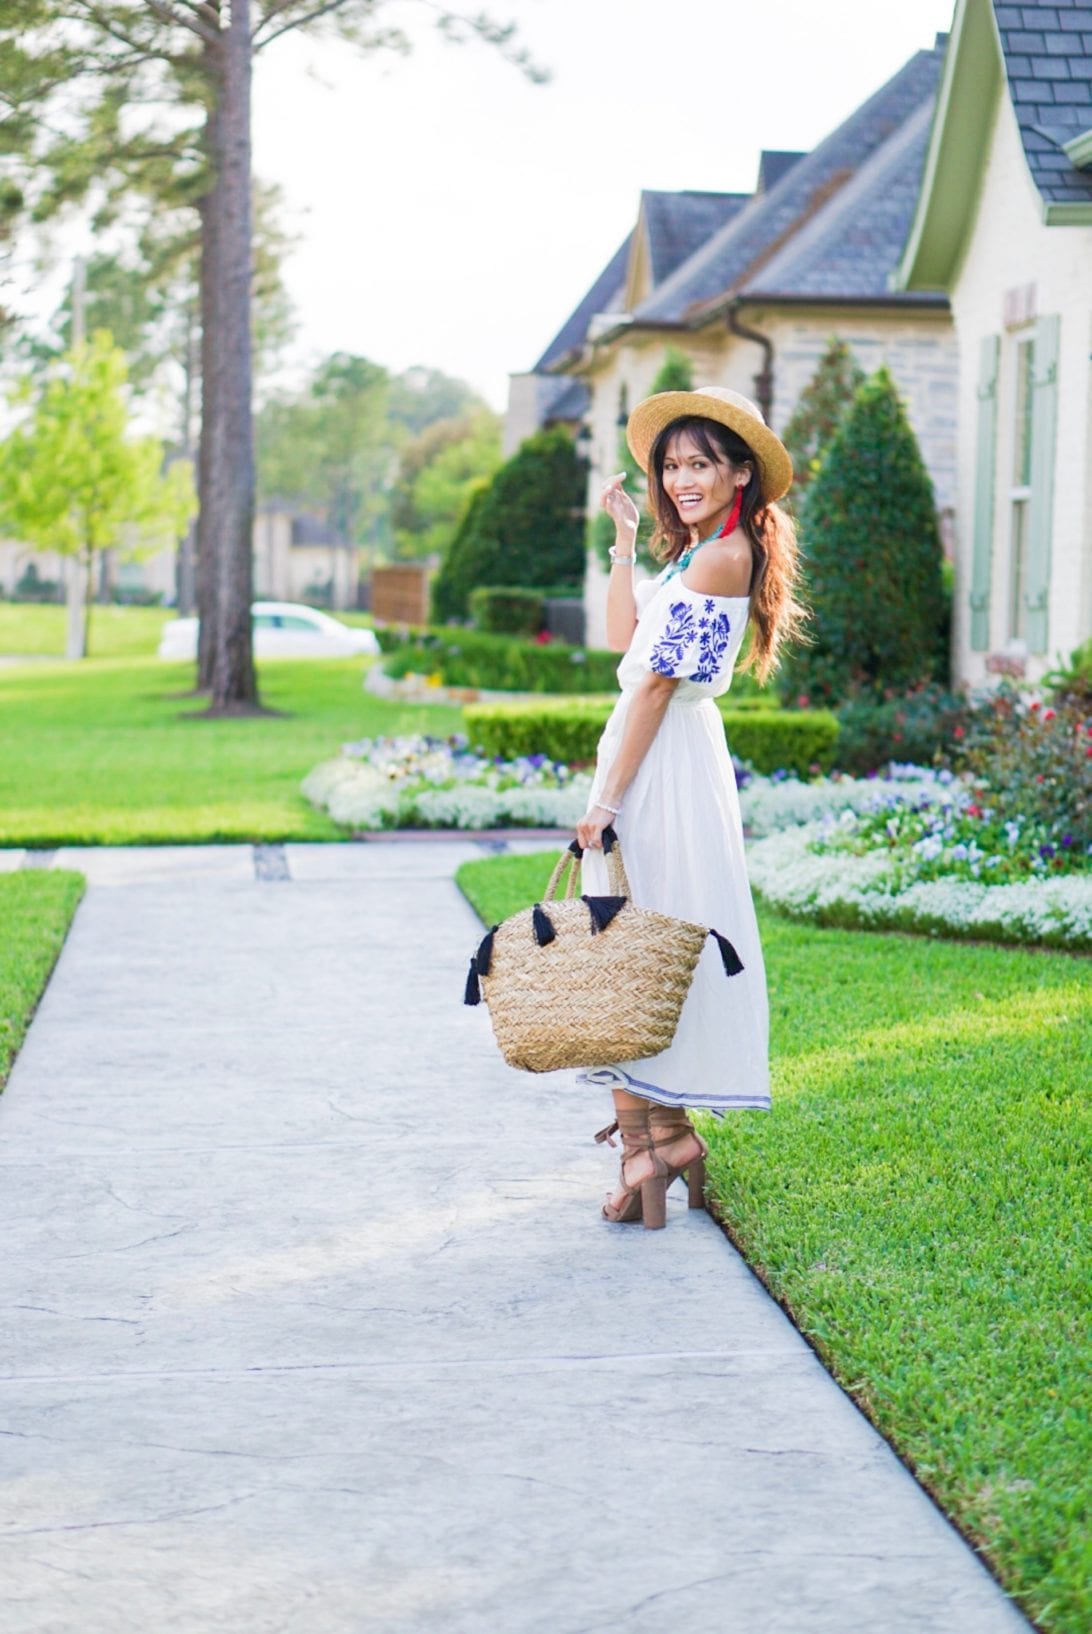 picnic outfit, straw tassel bag, blue embroidered dress, easter dress